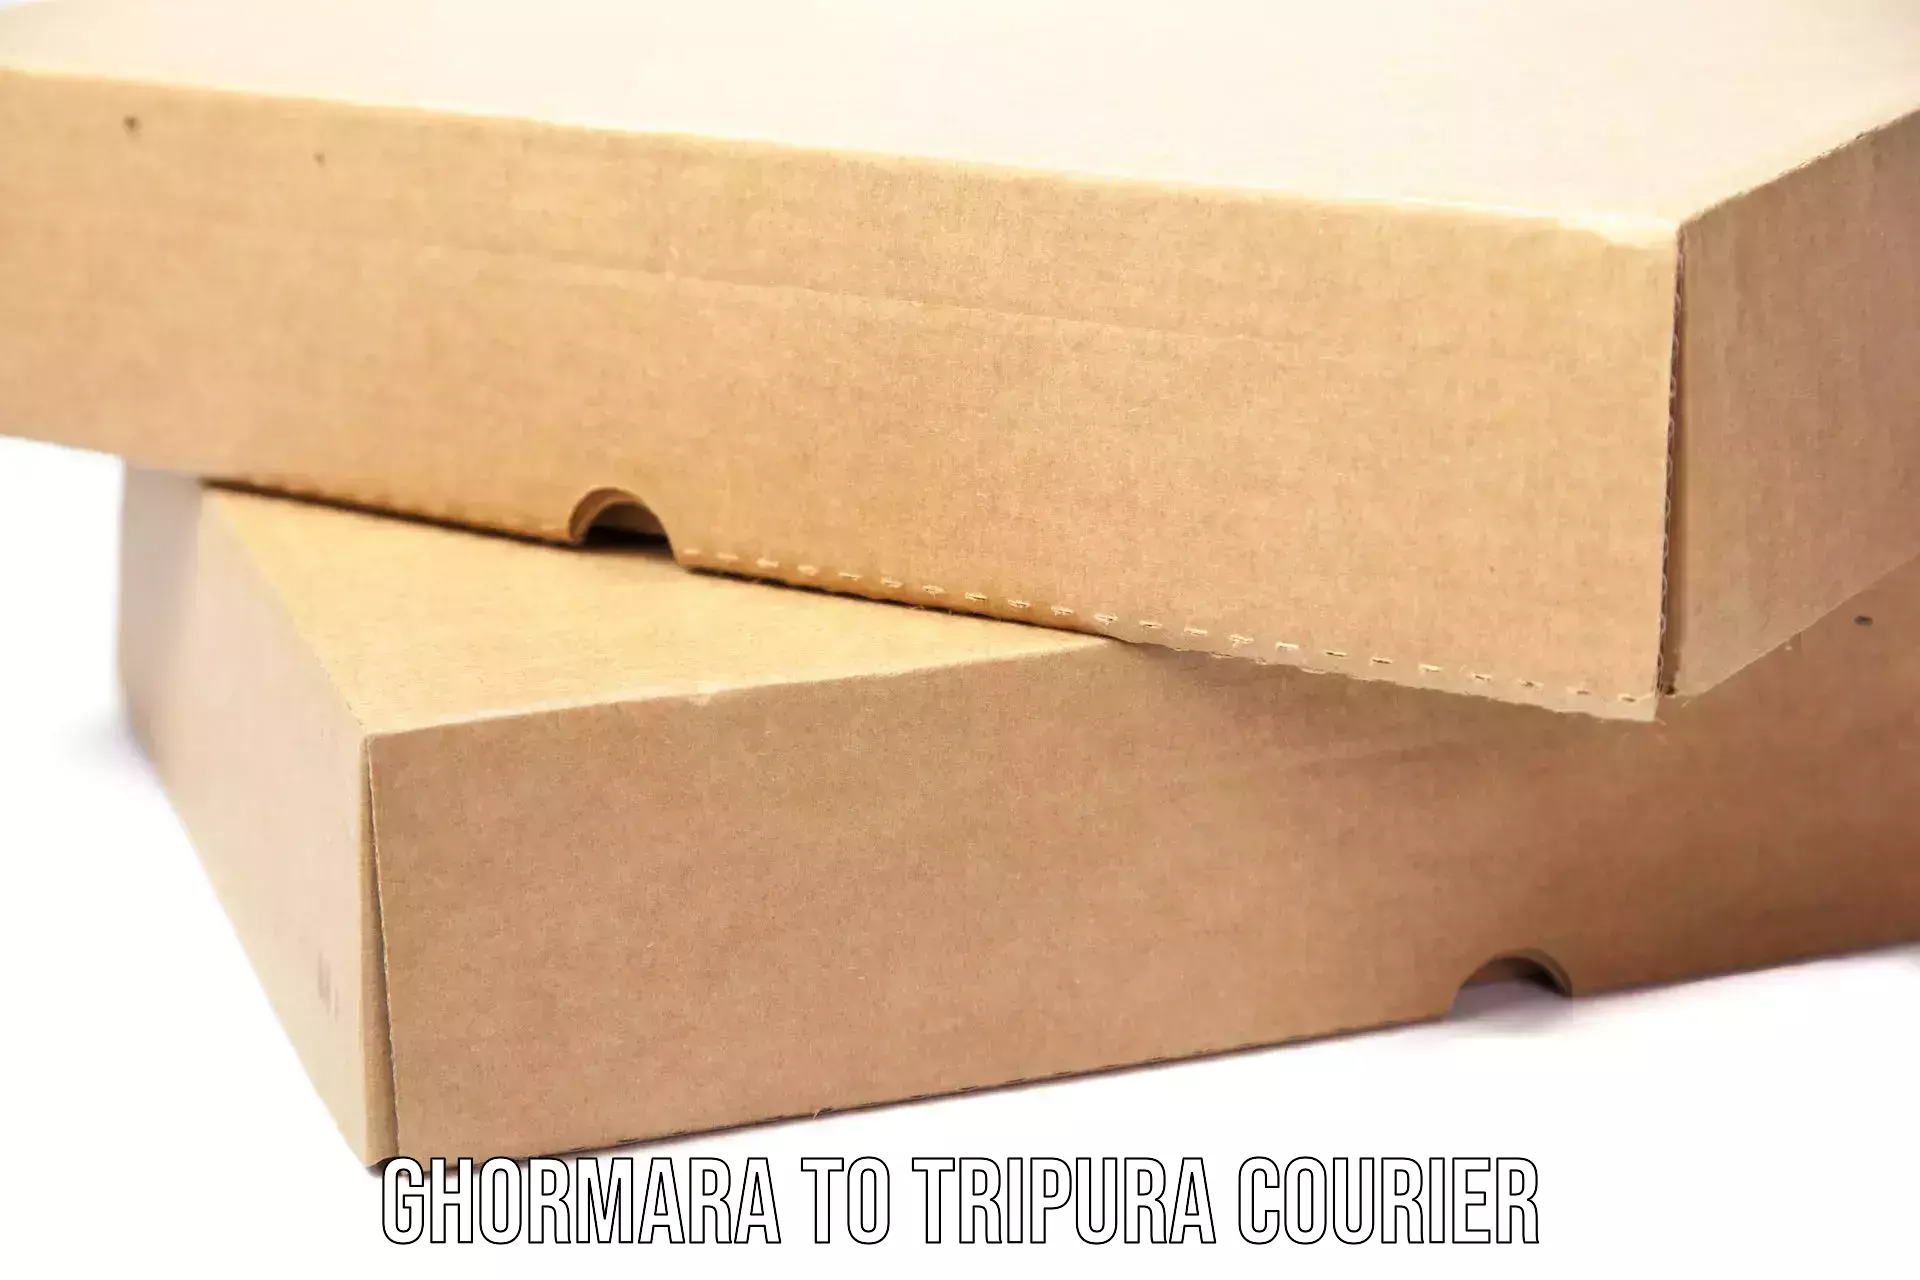 Full-service courier options Ghormara to Aambasa